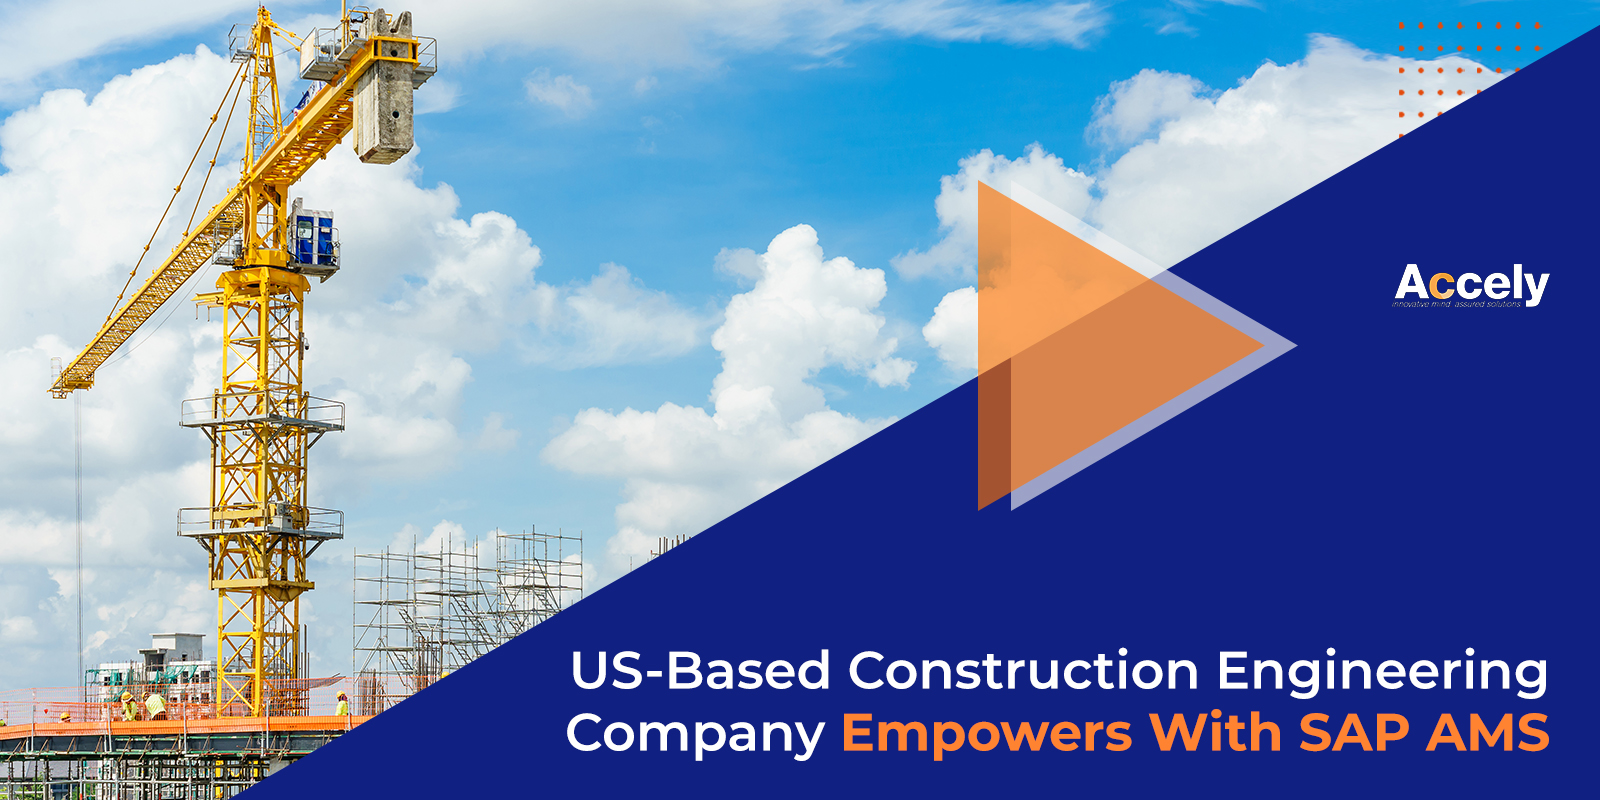 US-Based Construction Engineering Company Empowers With SAP AMS